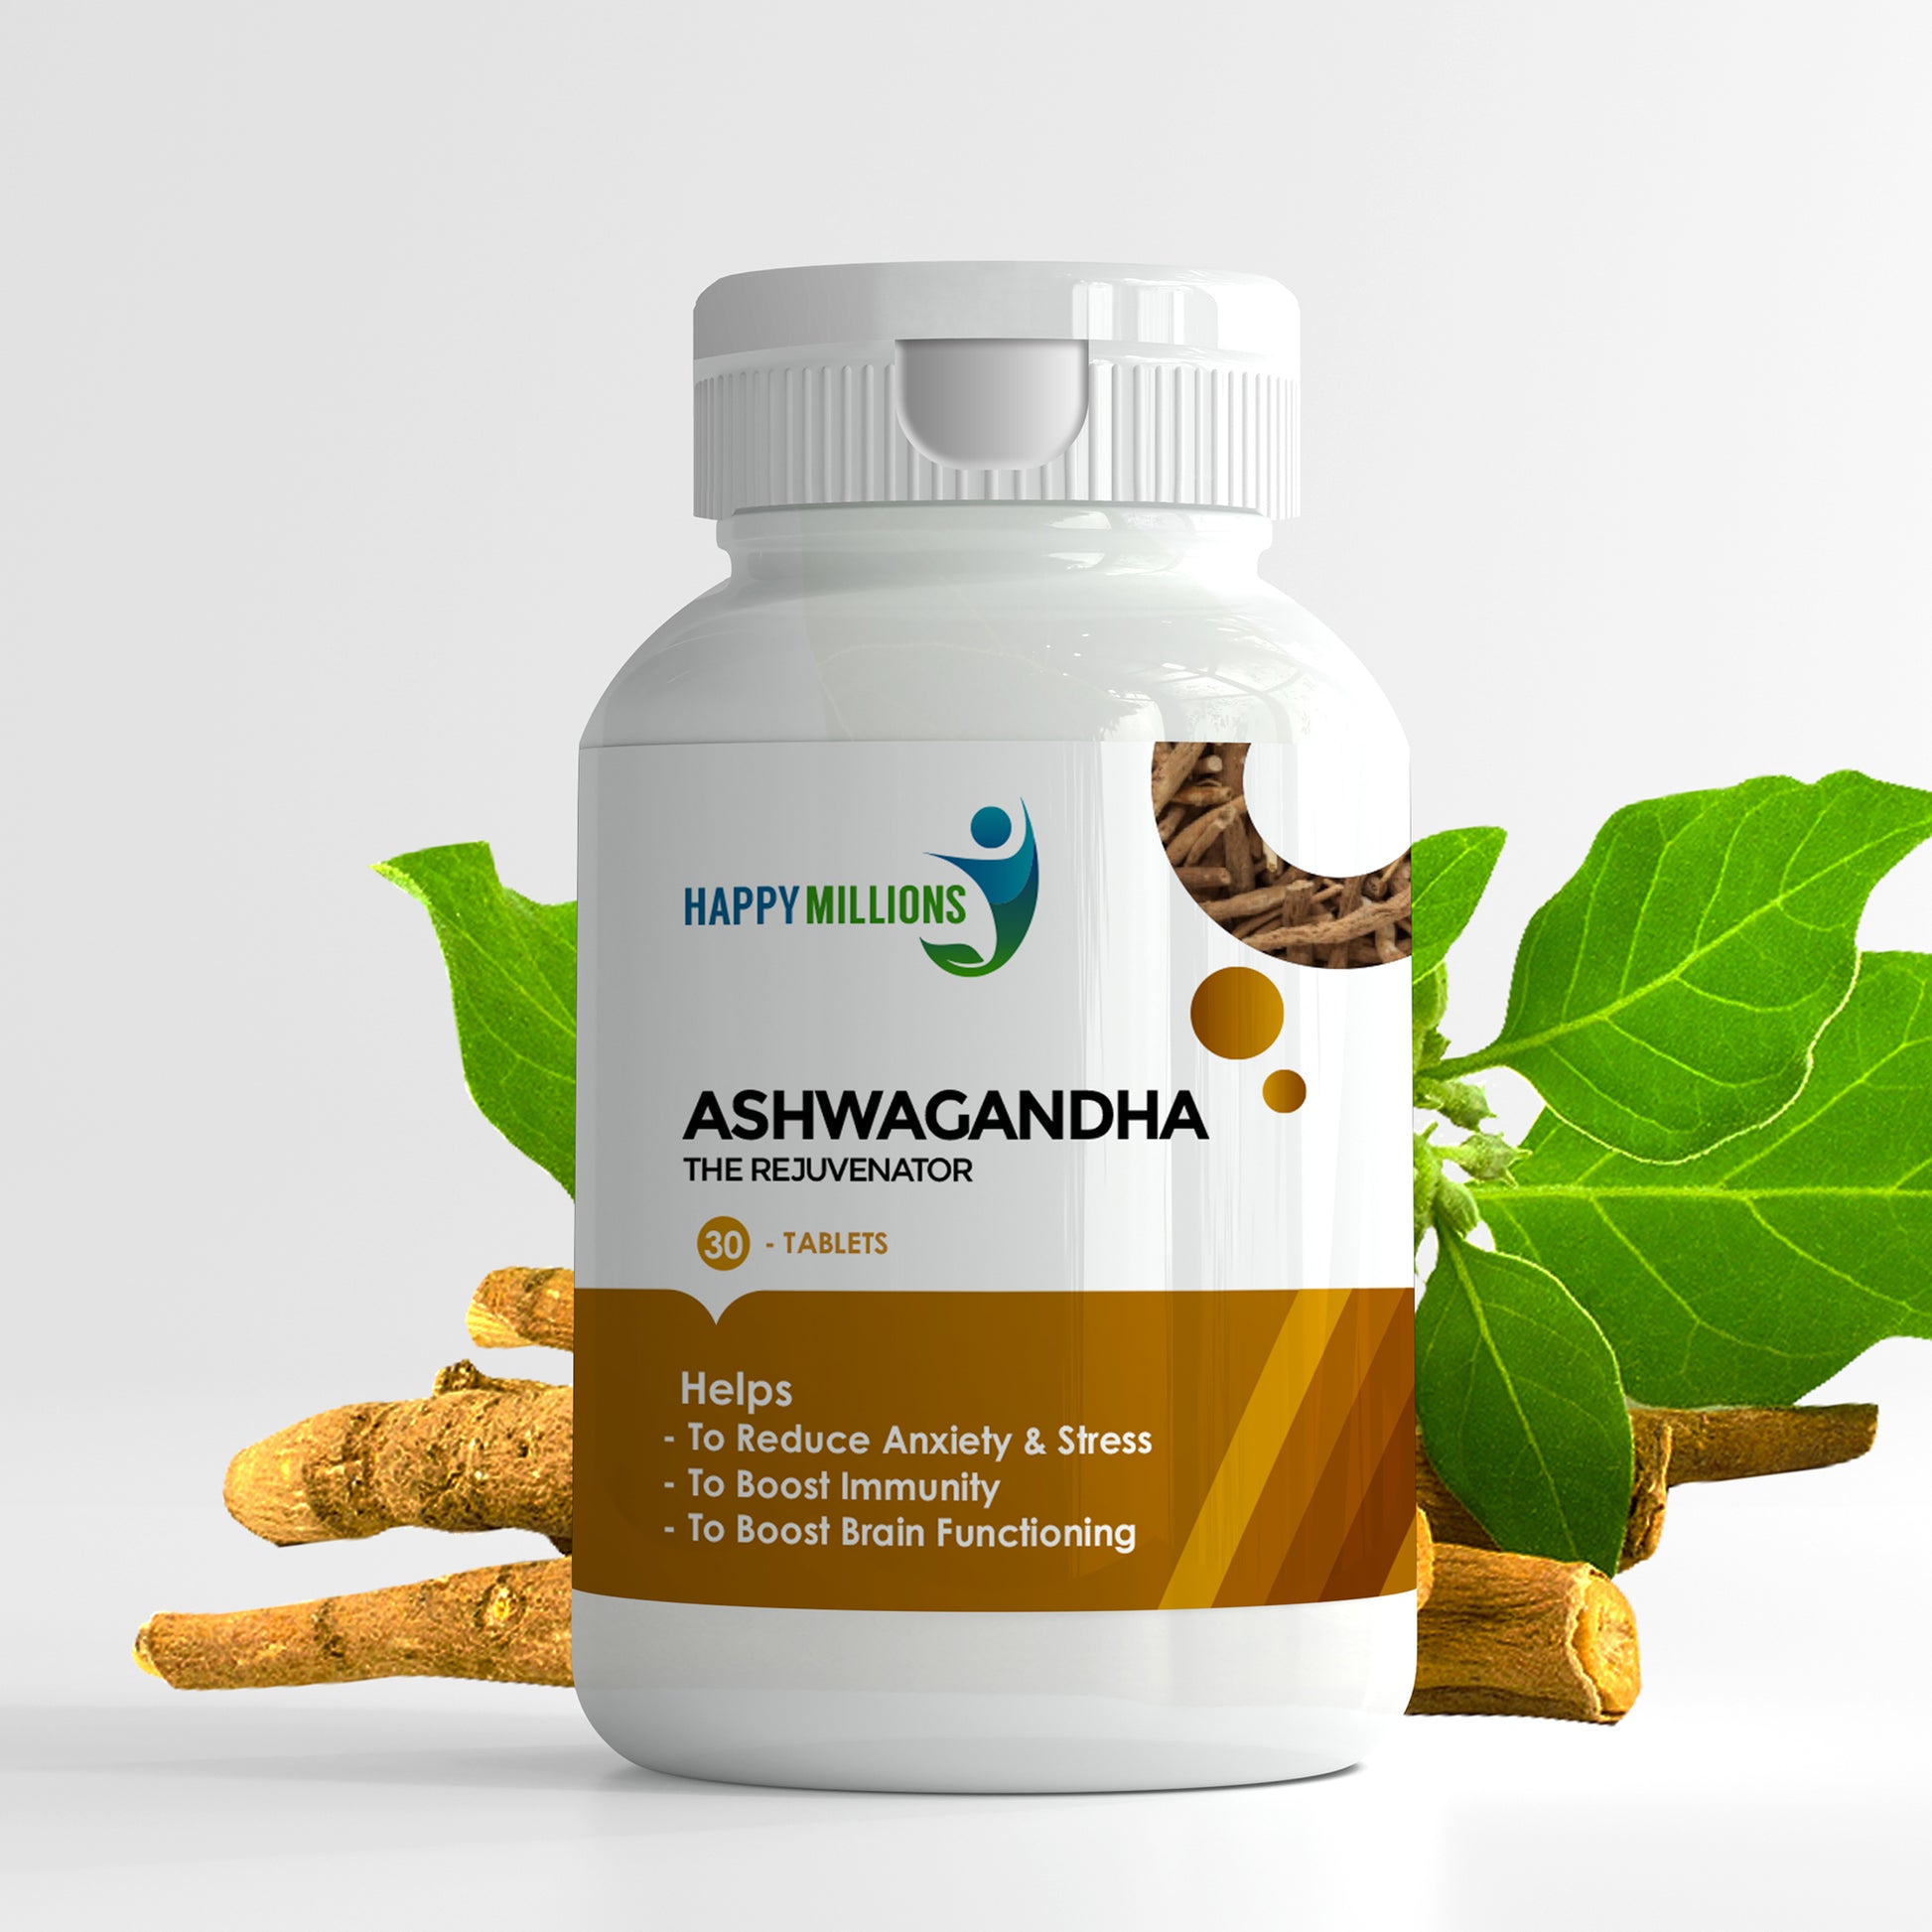 Experience Vitality & Stress Relief with Happy Millions Ashwagandha Benefits for Enhanced Well-being and Energy.